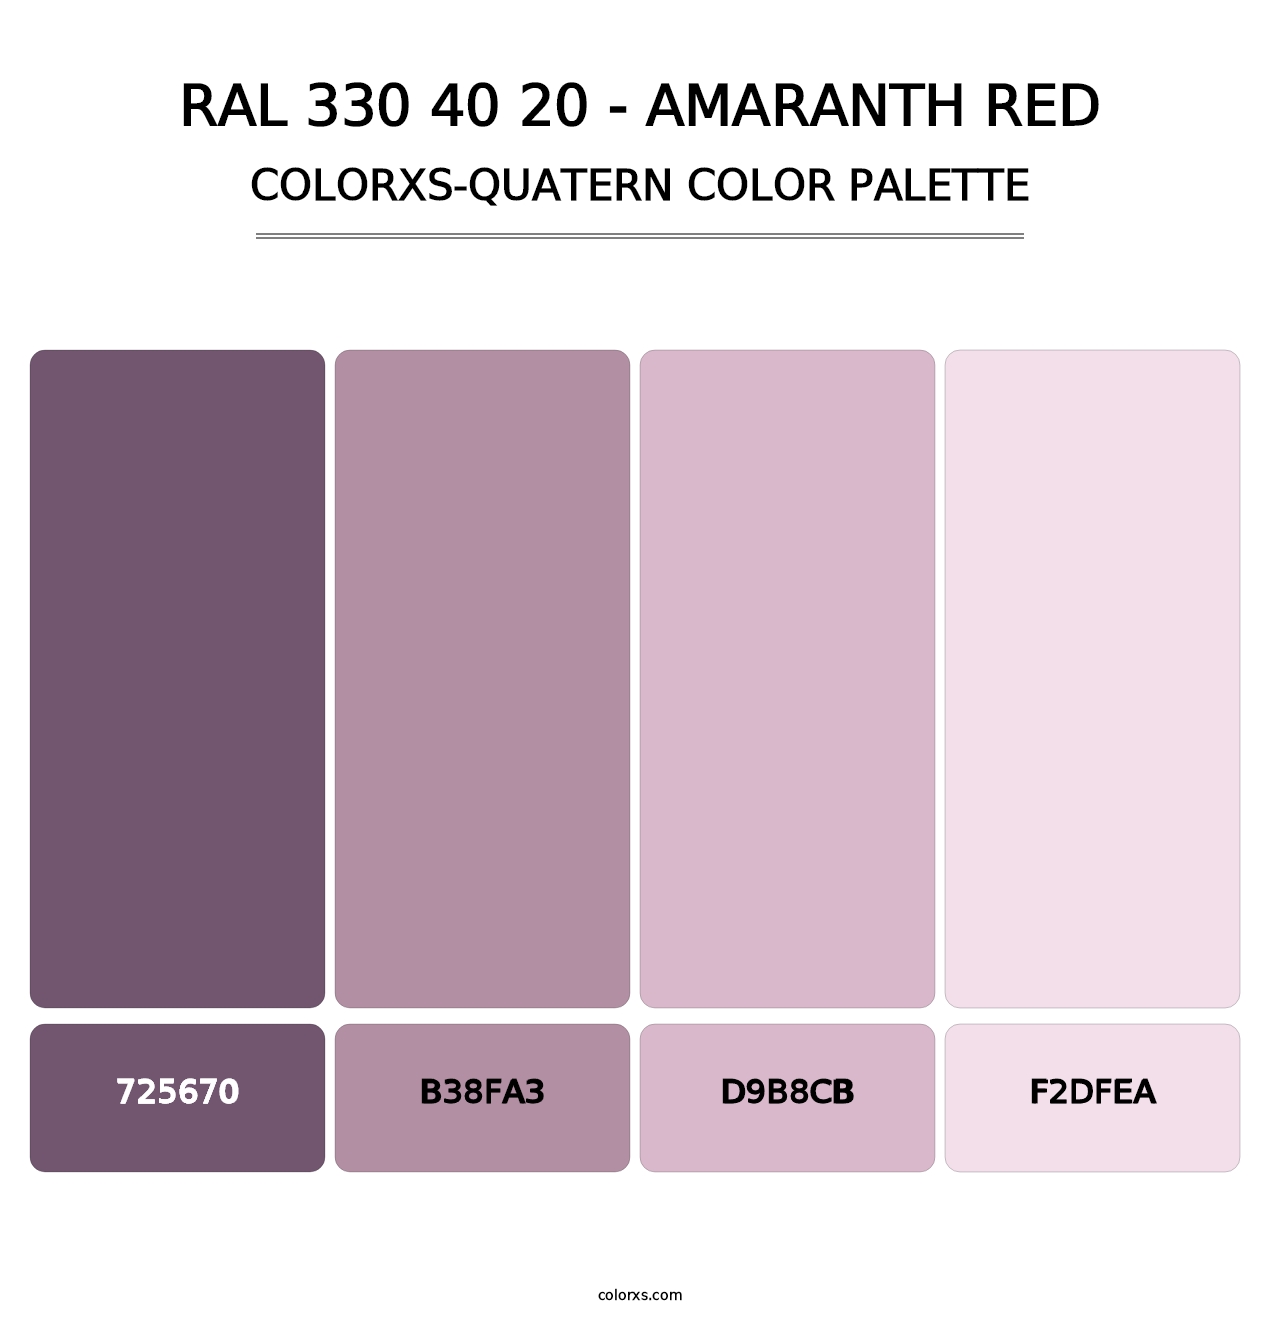 RAL 330 40 20 - Amaranth Red - Colorxs Quatern Palette